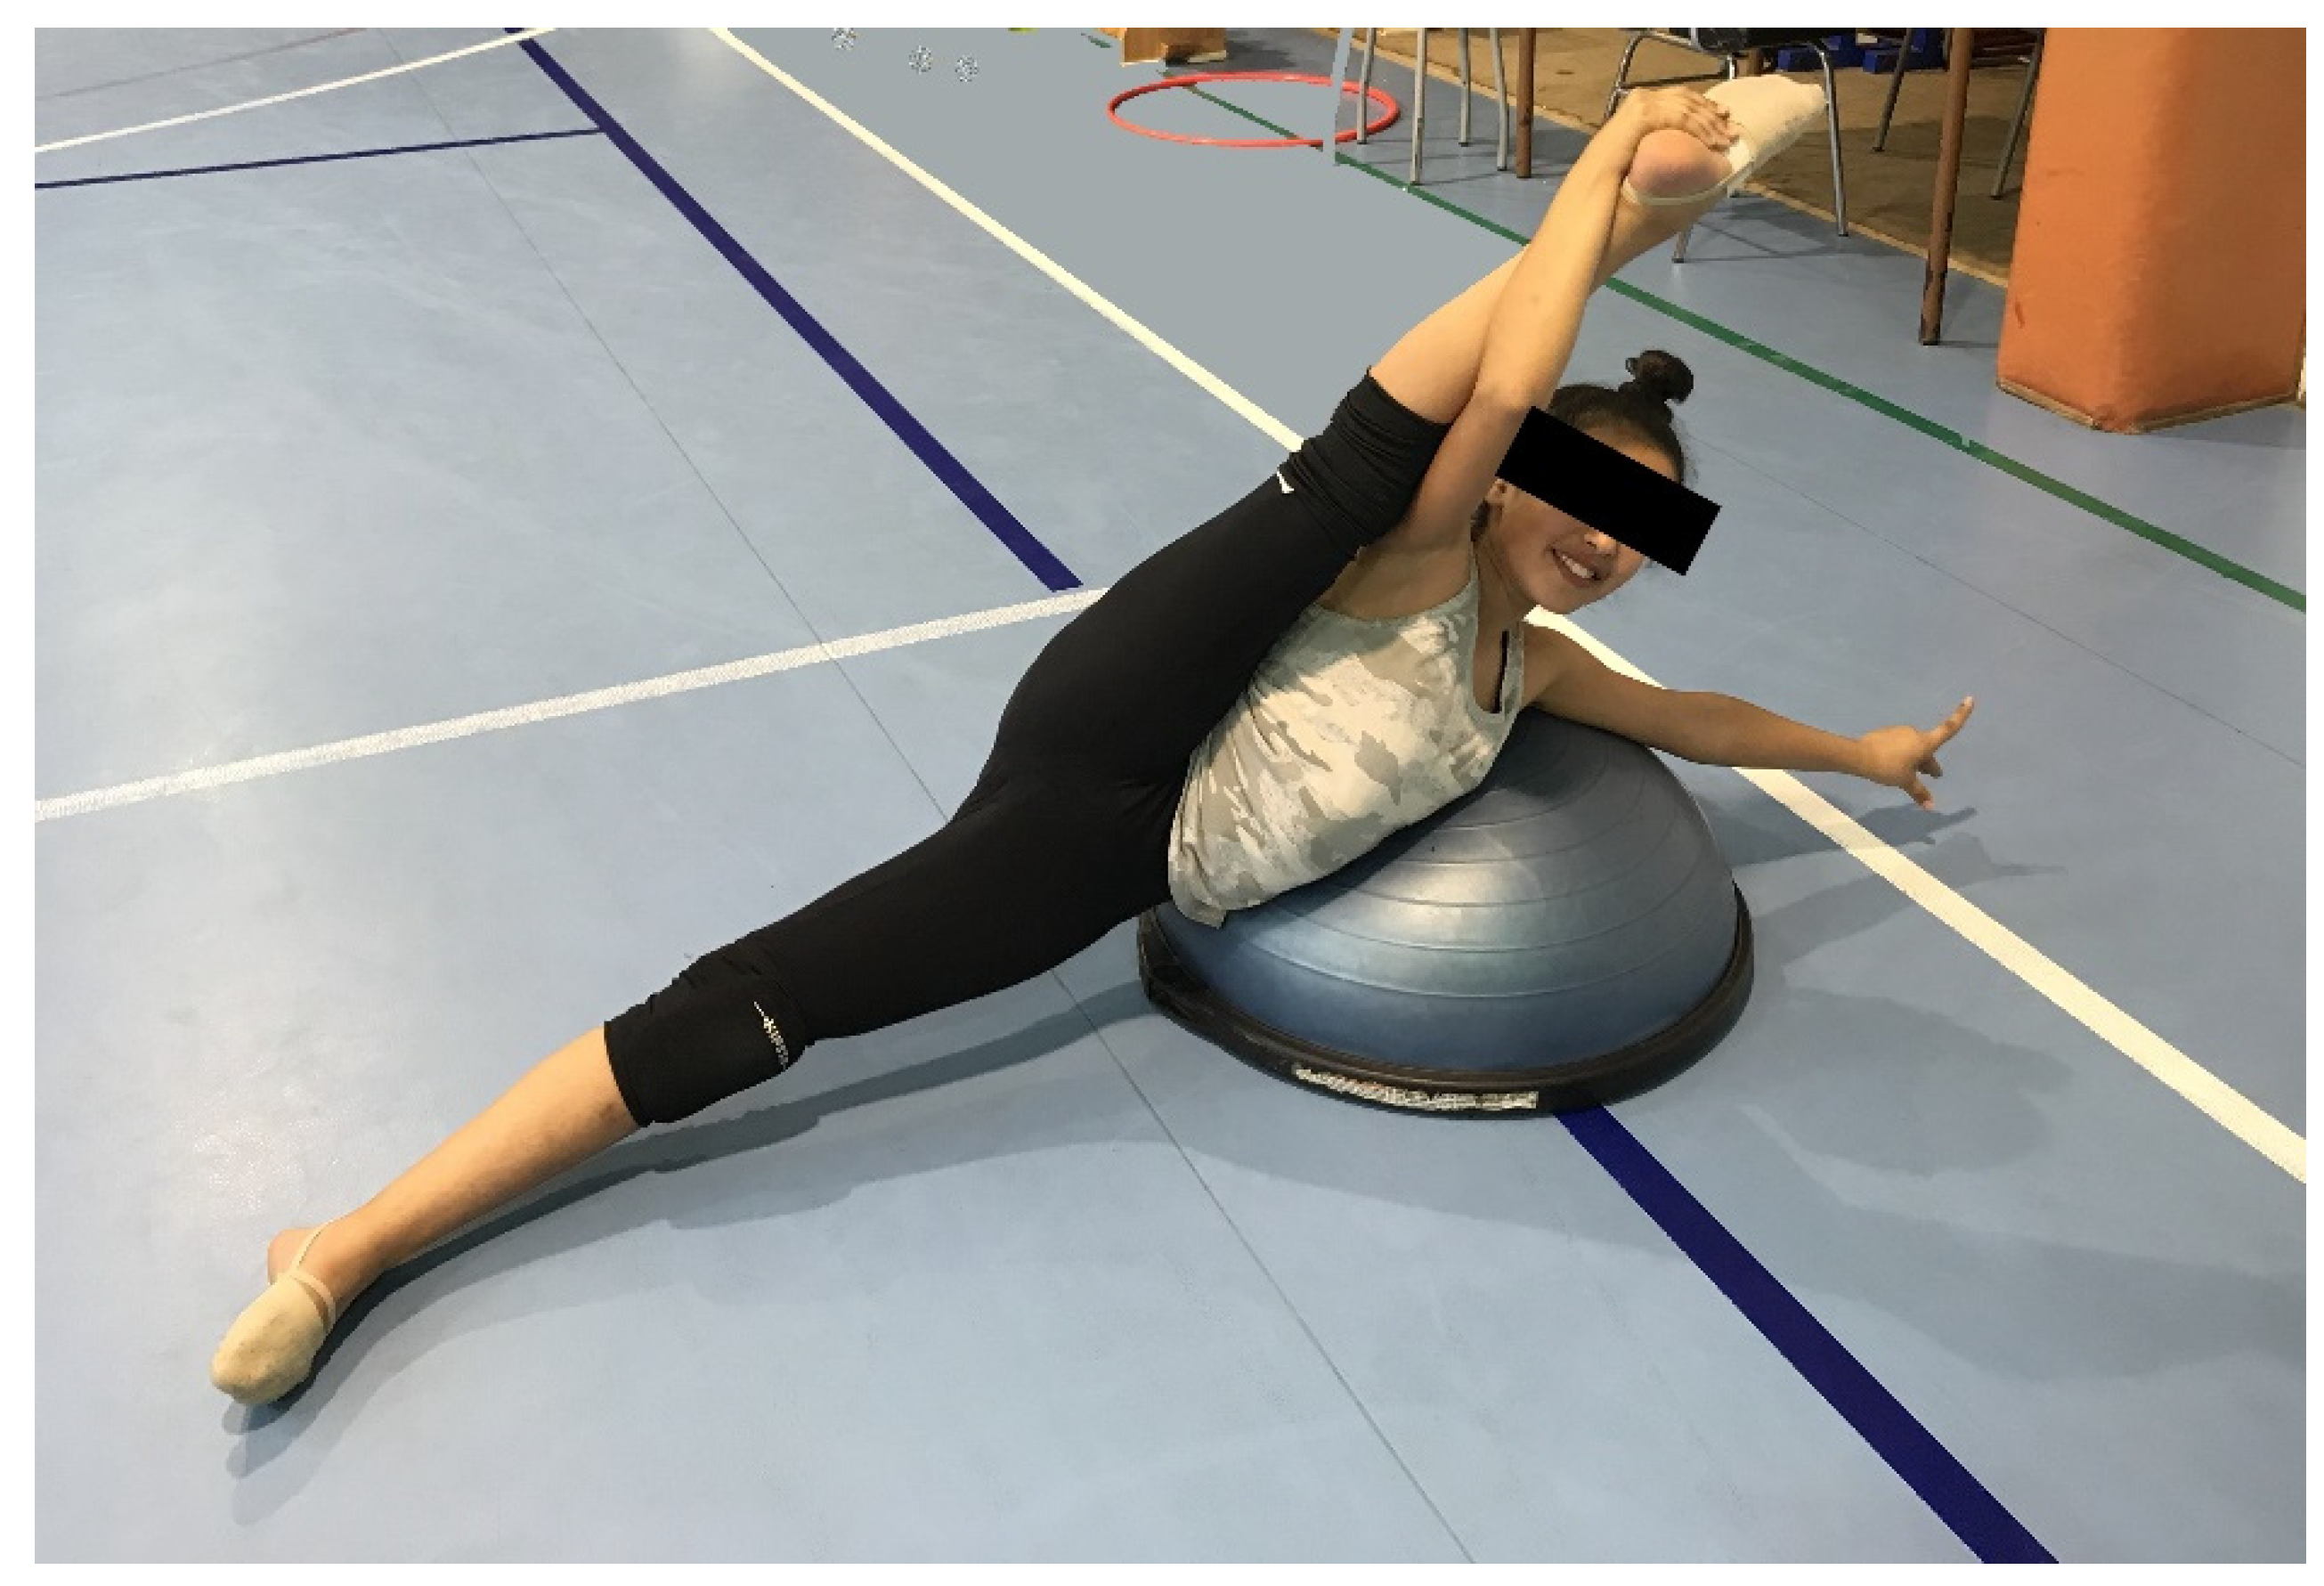 IJERPH | Free Full-Text | The Effect of Eight-Week Functional Core Training  on Core Stability in Young Rhythmic Gymnasts: A Randomized Clinical Trial |  HTML